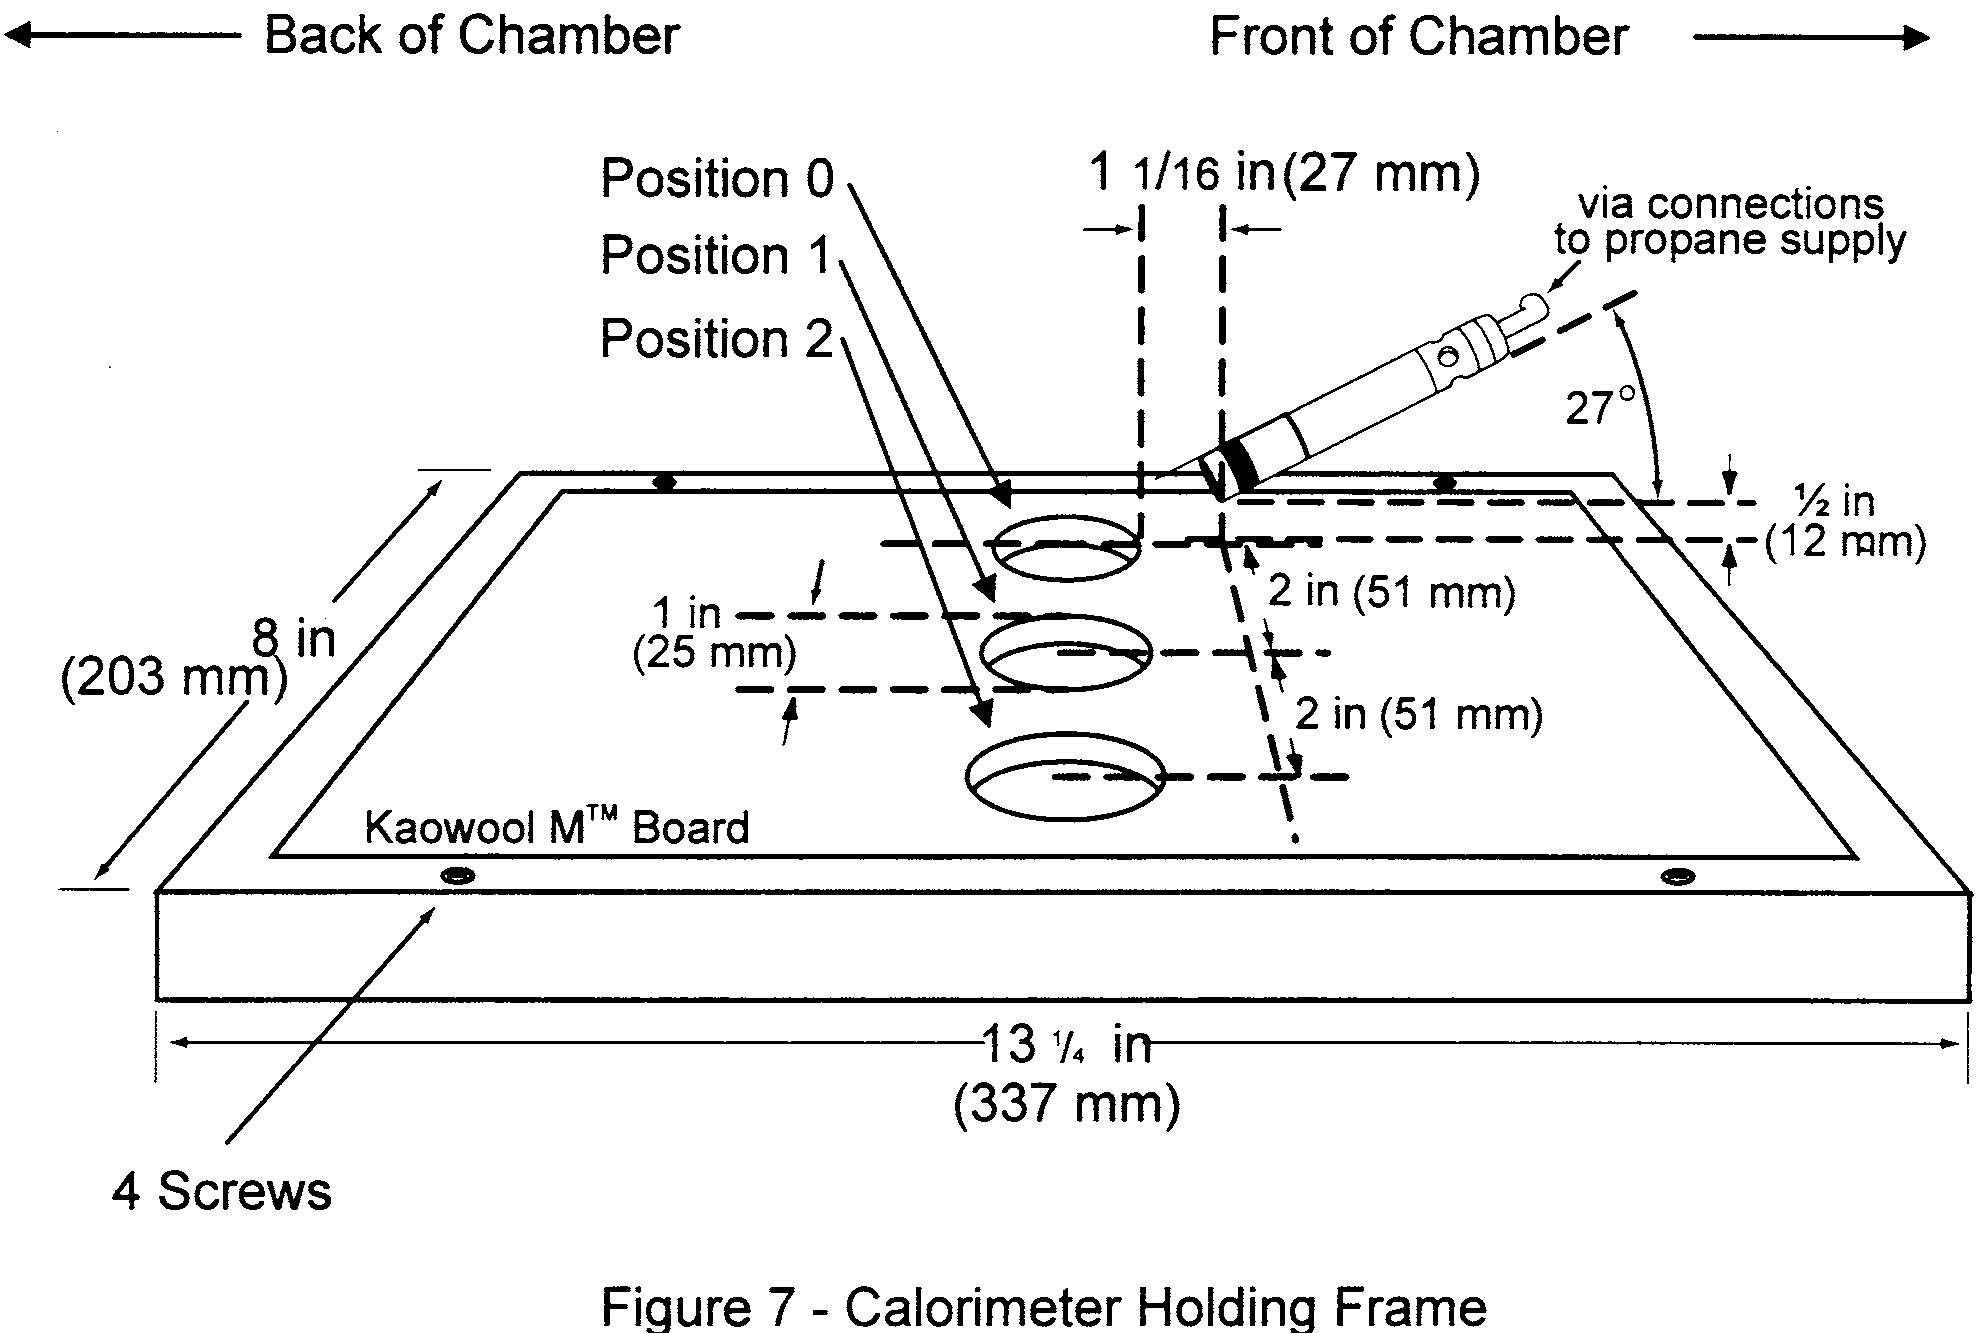 Graphic of (8) Calorimeter fixture. With the sliding platform pulled out of the chamber, install the calorimeter holding frame and place a sheet of non-combustible material in the bottom of the sliding platform adjacent to the holding frame. This will prevent heat losses during calibration. The frame must be 131/8 inches (333 mm) deep (front to back) by 8 inches (203 mm) wide and must rest on the top of the sliding platform. It must be fabricated of 1/8 inch (3.2 mm) flat stock steel and have an opening that accommodates a 1/2 inch (12.7 mm) thick piece of refractory board, which is level with the top of the sliding platform. The board must have three 1-inch (25.4 mm) diameter holes drilled through the board for calorimeter insertion. The distance to the radiant panel surface from the centerline of the first hole (“zero” position) must be 71/2 ±1/8 inches (191 ±3 mm). The distance between the centerline of the first hole to the centerline of the second hole must be 2 inches (51 mm). It must also be the same distance from the centerline of the second hole to the centerline of the third hole. See figure 7. A calorimeter holding frame that differs in construction is acceptable as long as the height from the centerline of the first hole to the radiant panel and the distance between holes is the same as described in this paragraph.